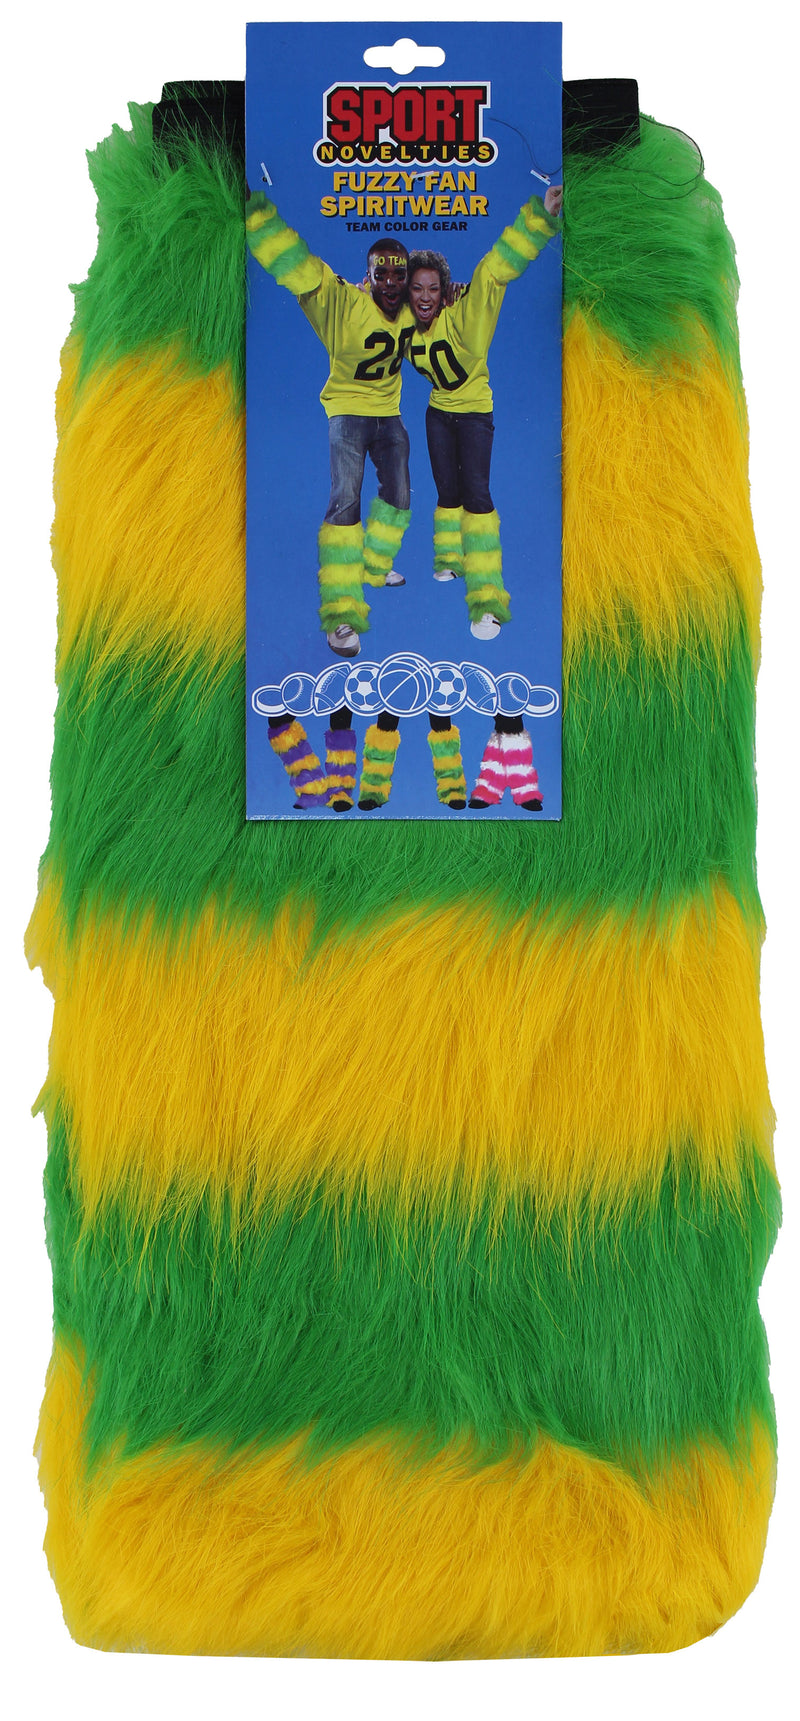 fuzzy,green,and,gold,leg,warmers,fuzzies,clothing accessories,socks,pants,winter